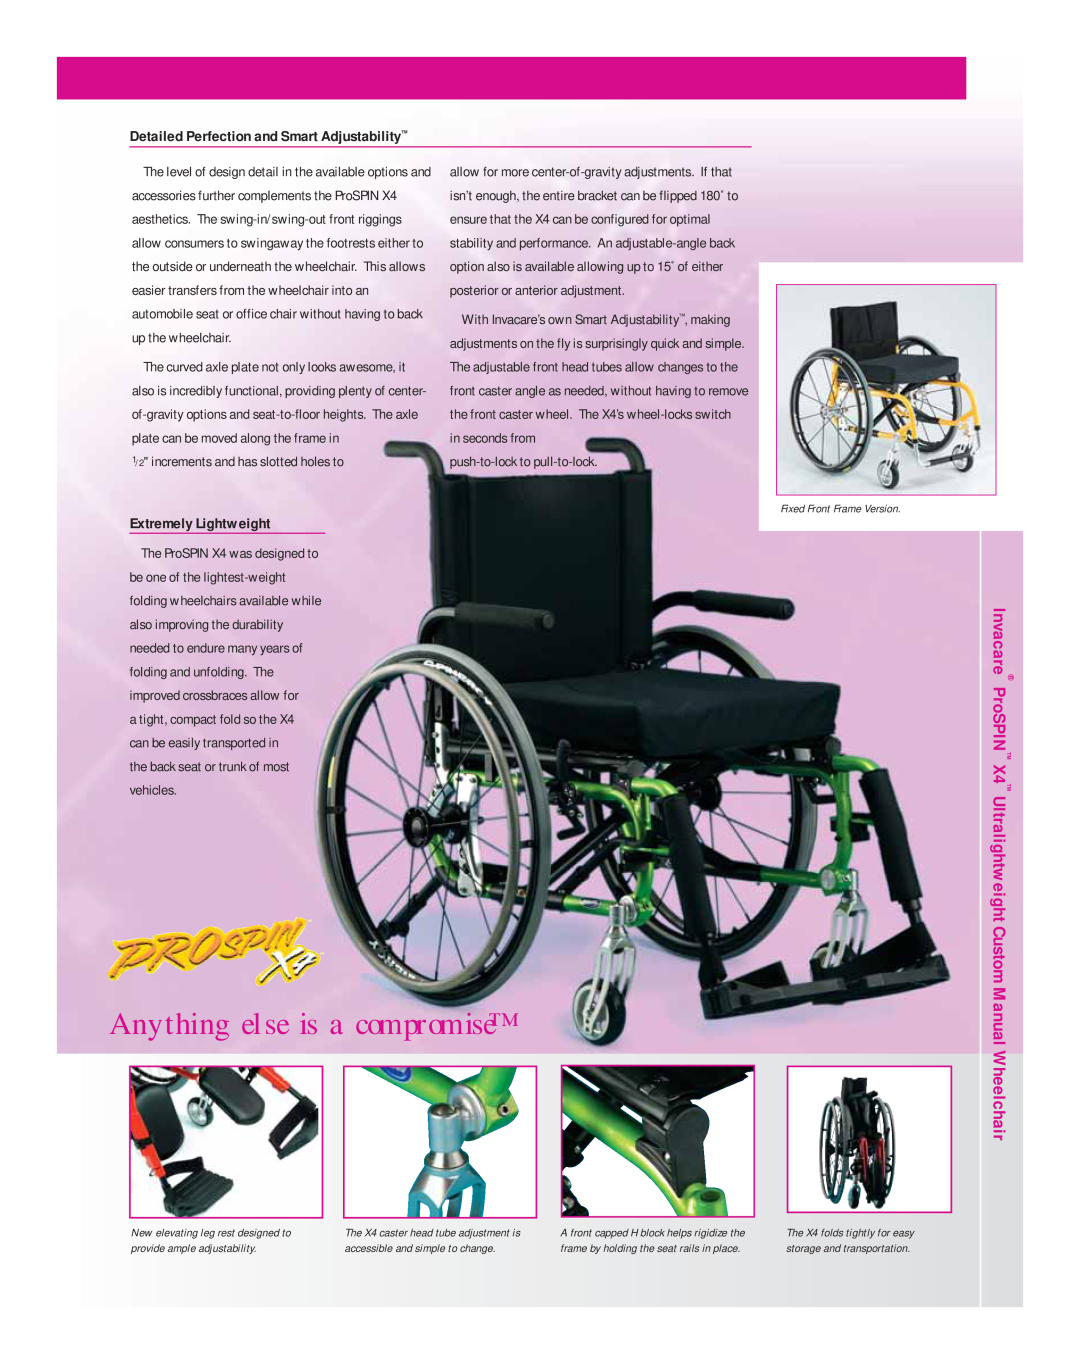 Invacare ProSPIN X4 manual 1/2 increments and has slotted holes to, push-to-lock to pull-to-lock, Fixed Front Frame Version 